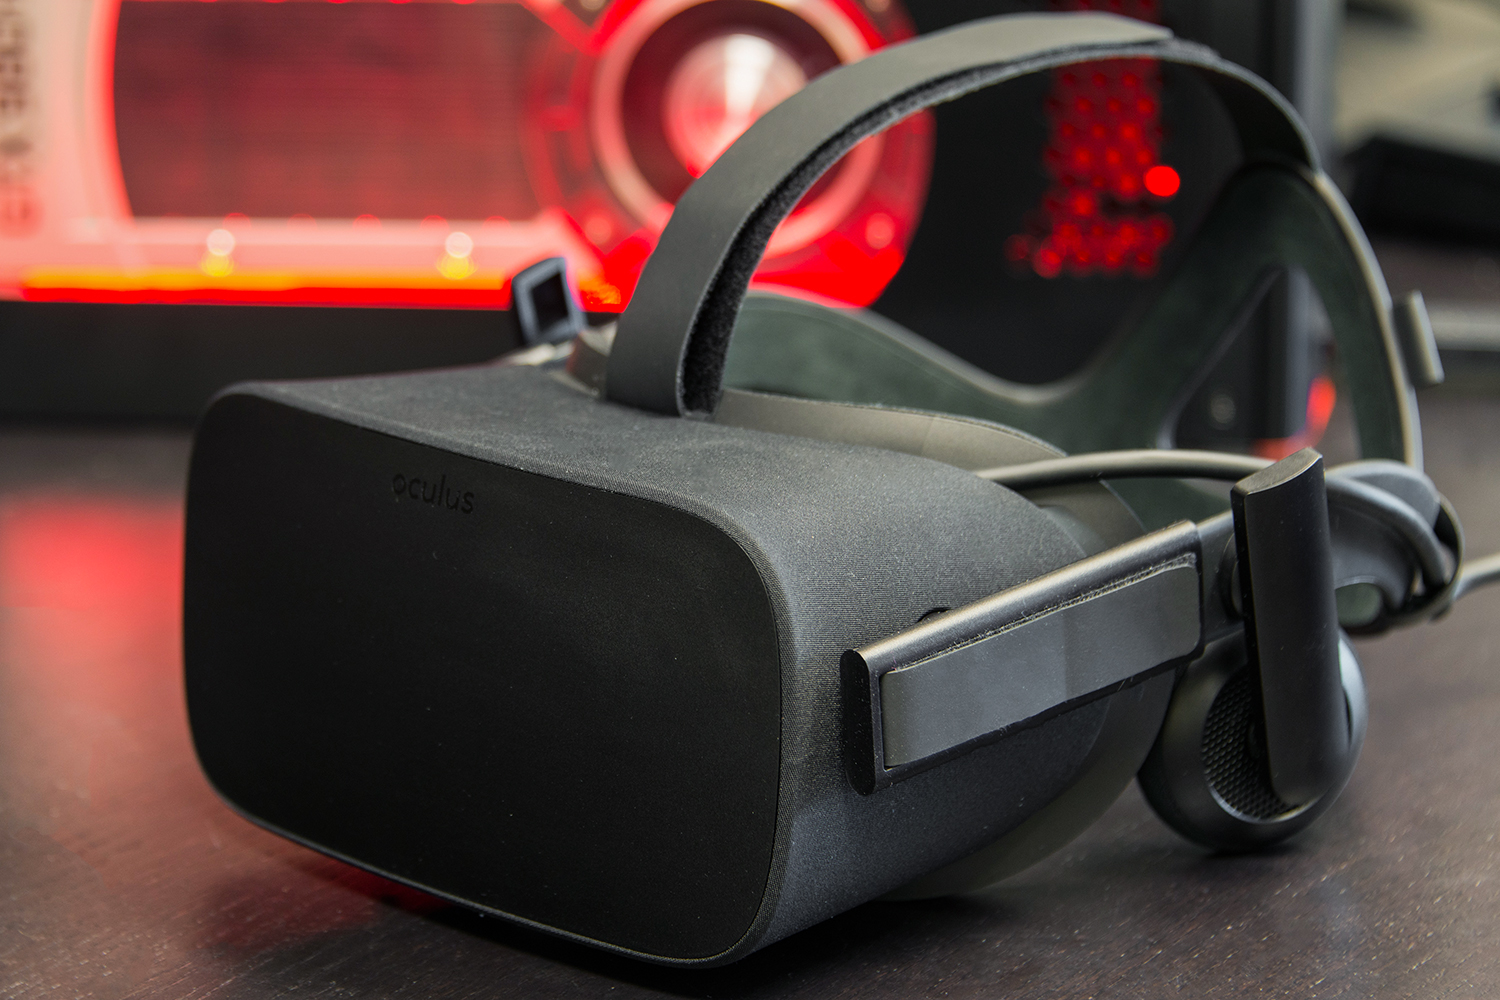 Oculus Rift S virtual reality headset review